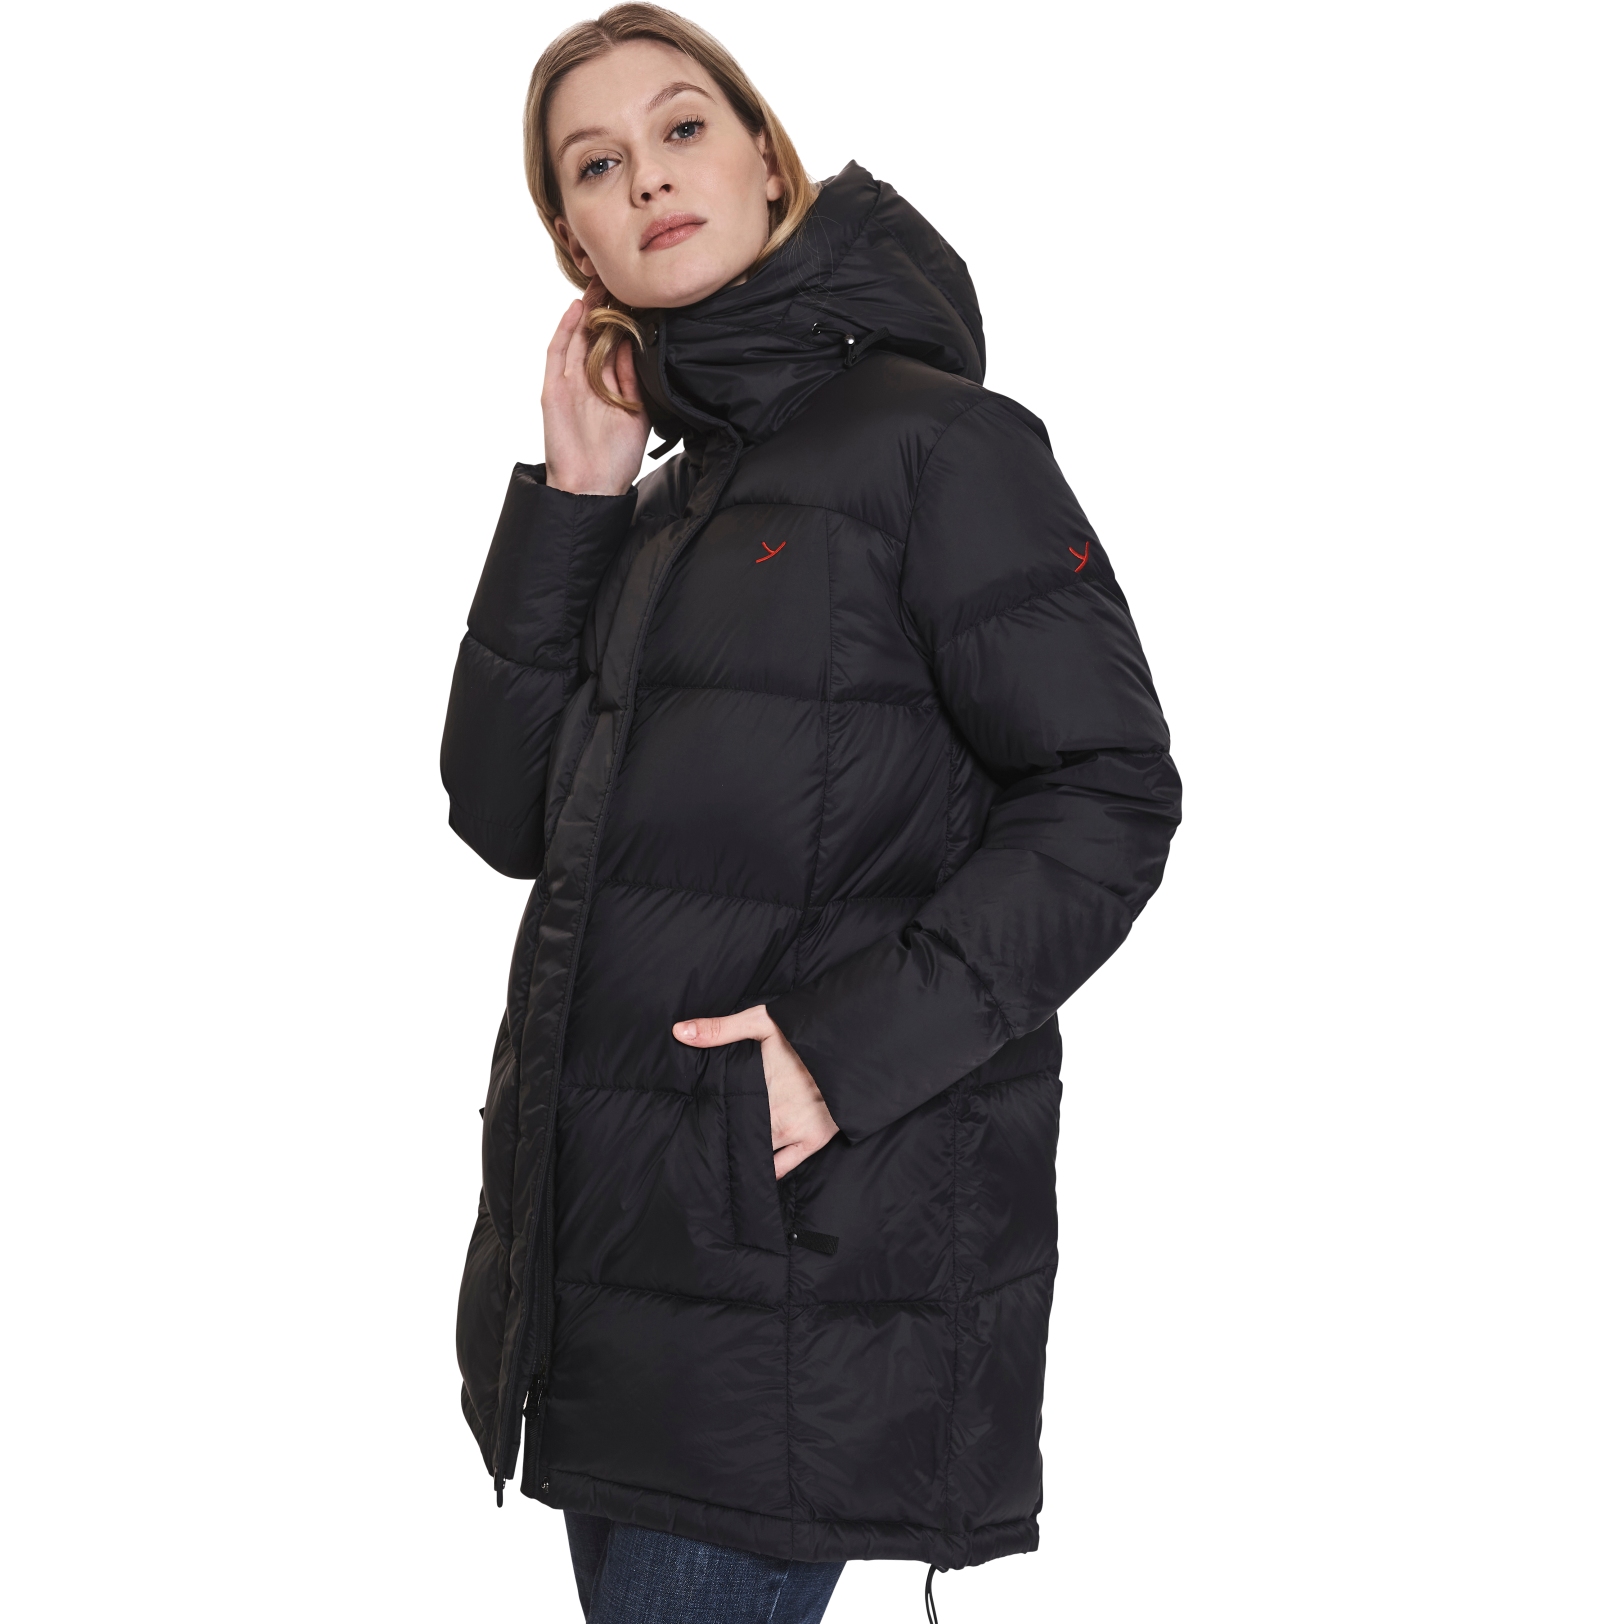 Picture of Y by Nordisk Katea Down Coat Women - black